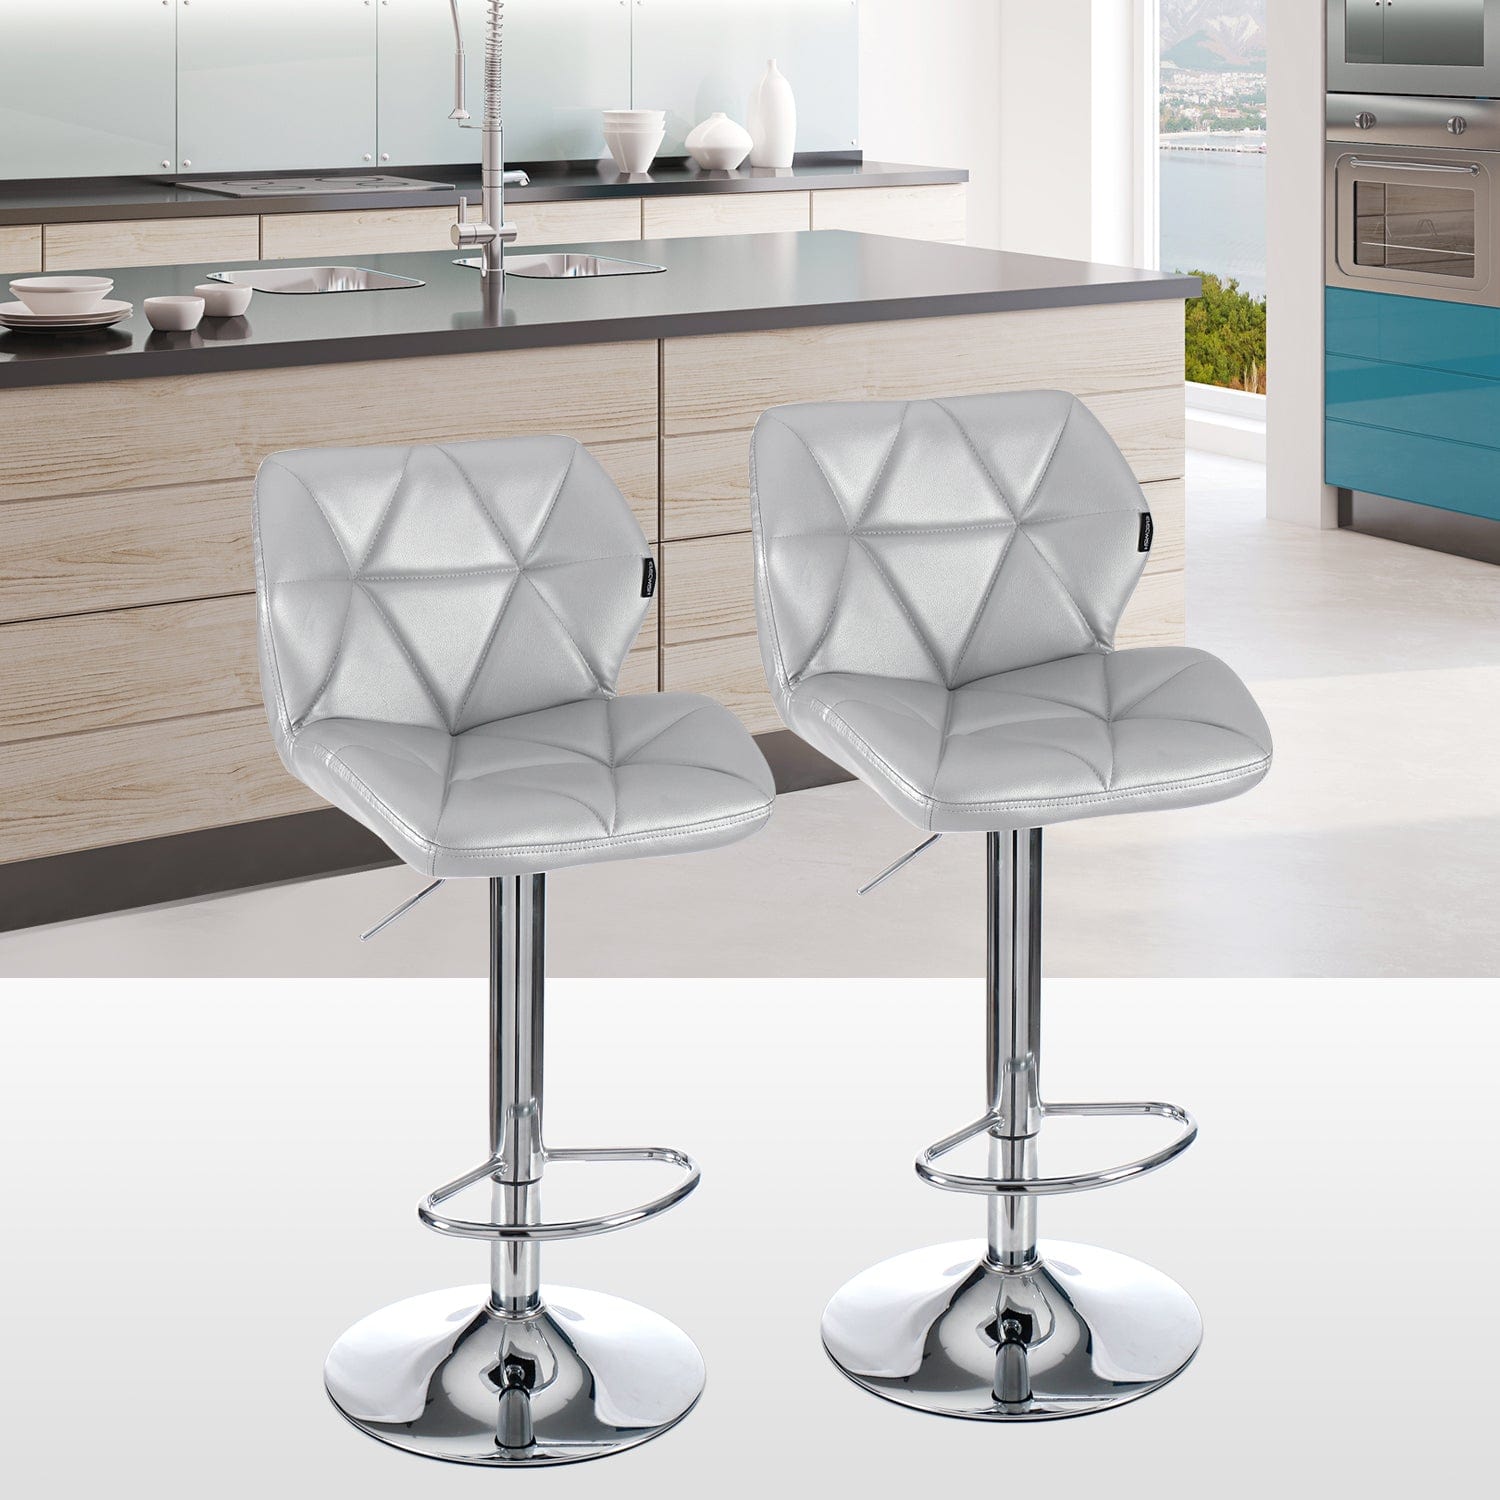 Elecwish Grid Silver Barstools Set of 2 Bar Stools OW001 displays in the kitchen